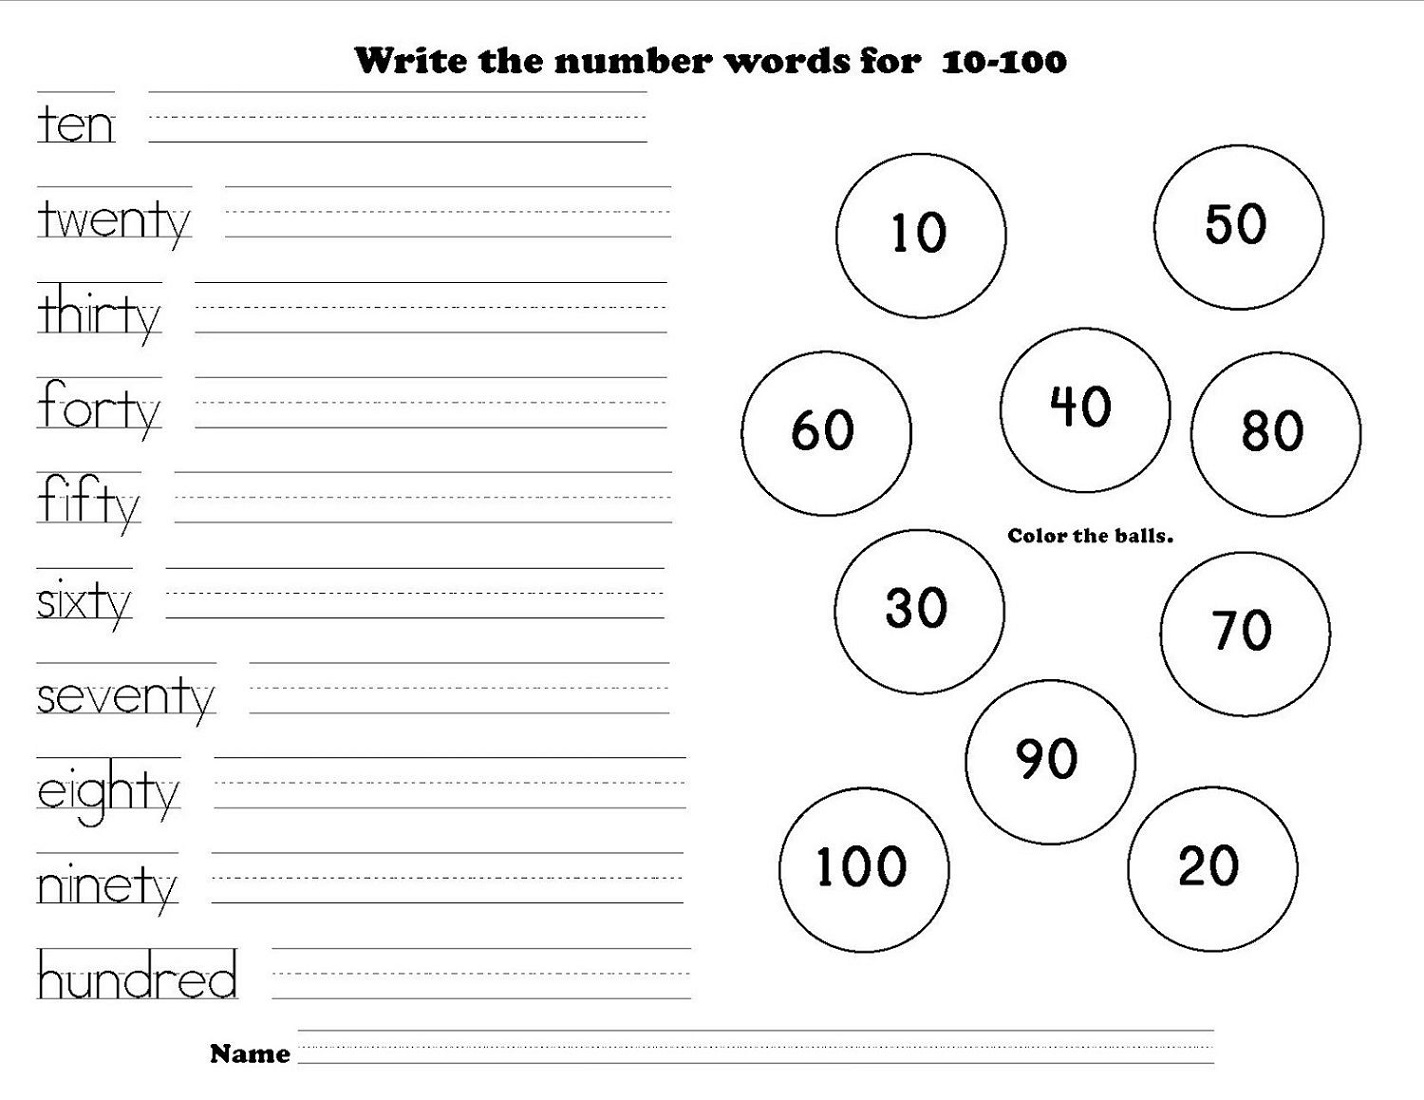 Writing Numbers Worksheet for 10-100